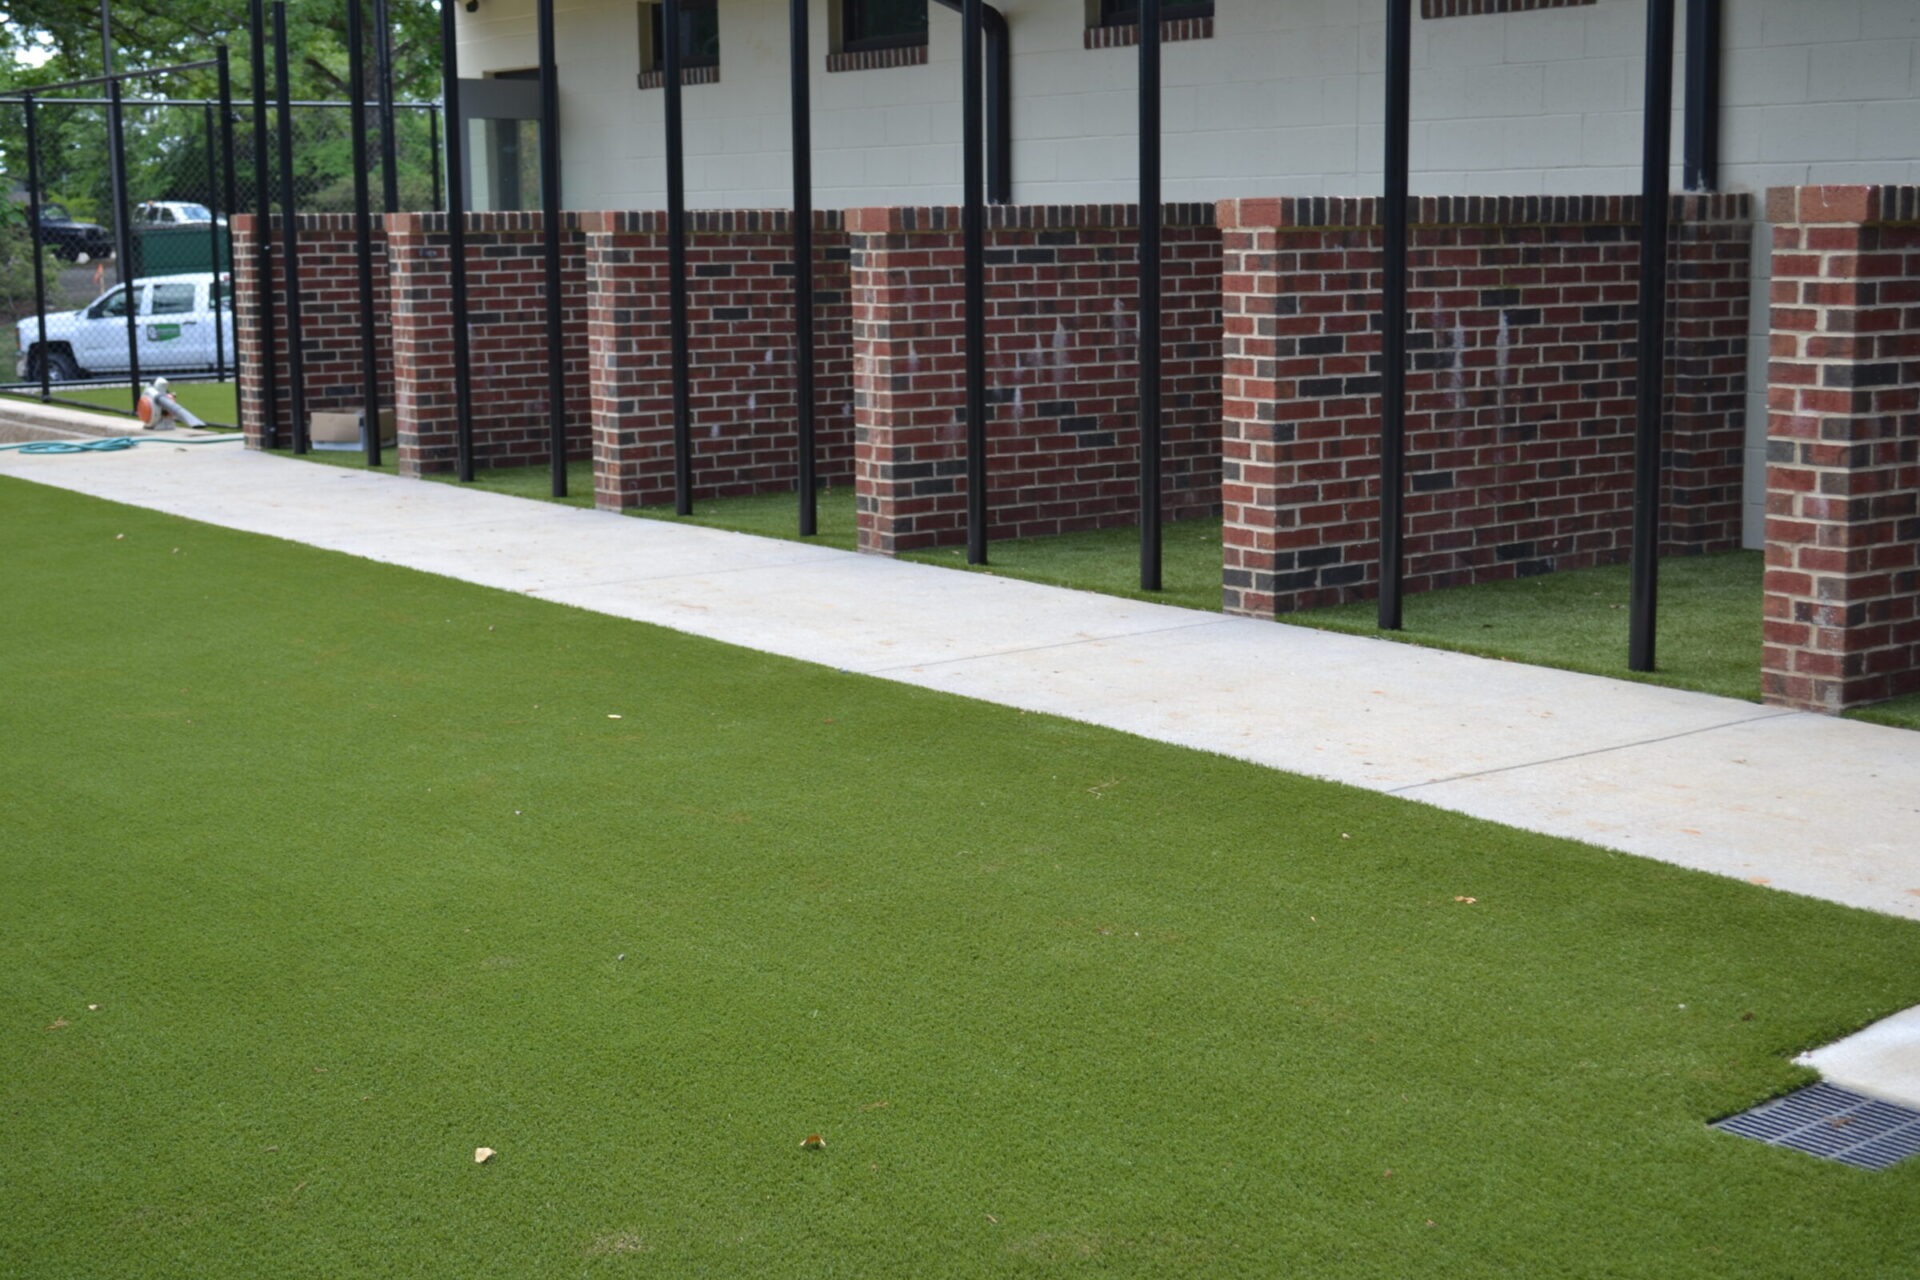 This image shows a well-manicured artificial green turf next to a concrete path, with a brick building and a black metal fence in the background.